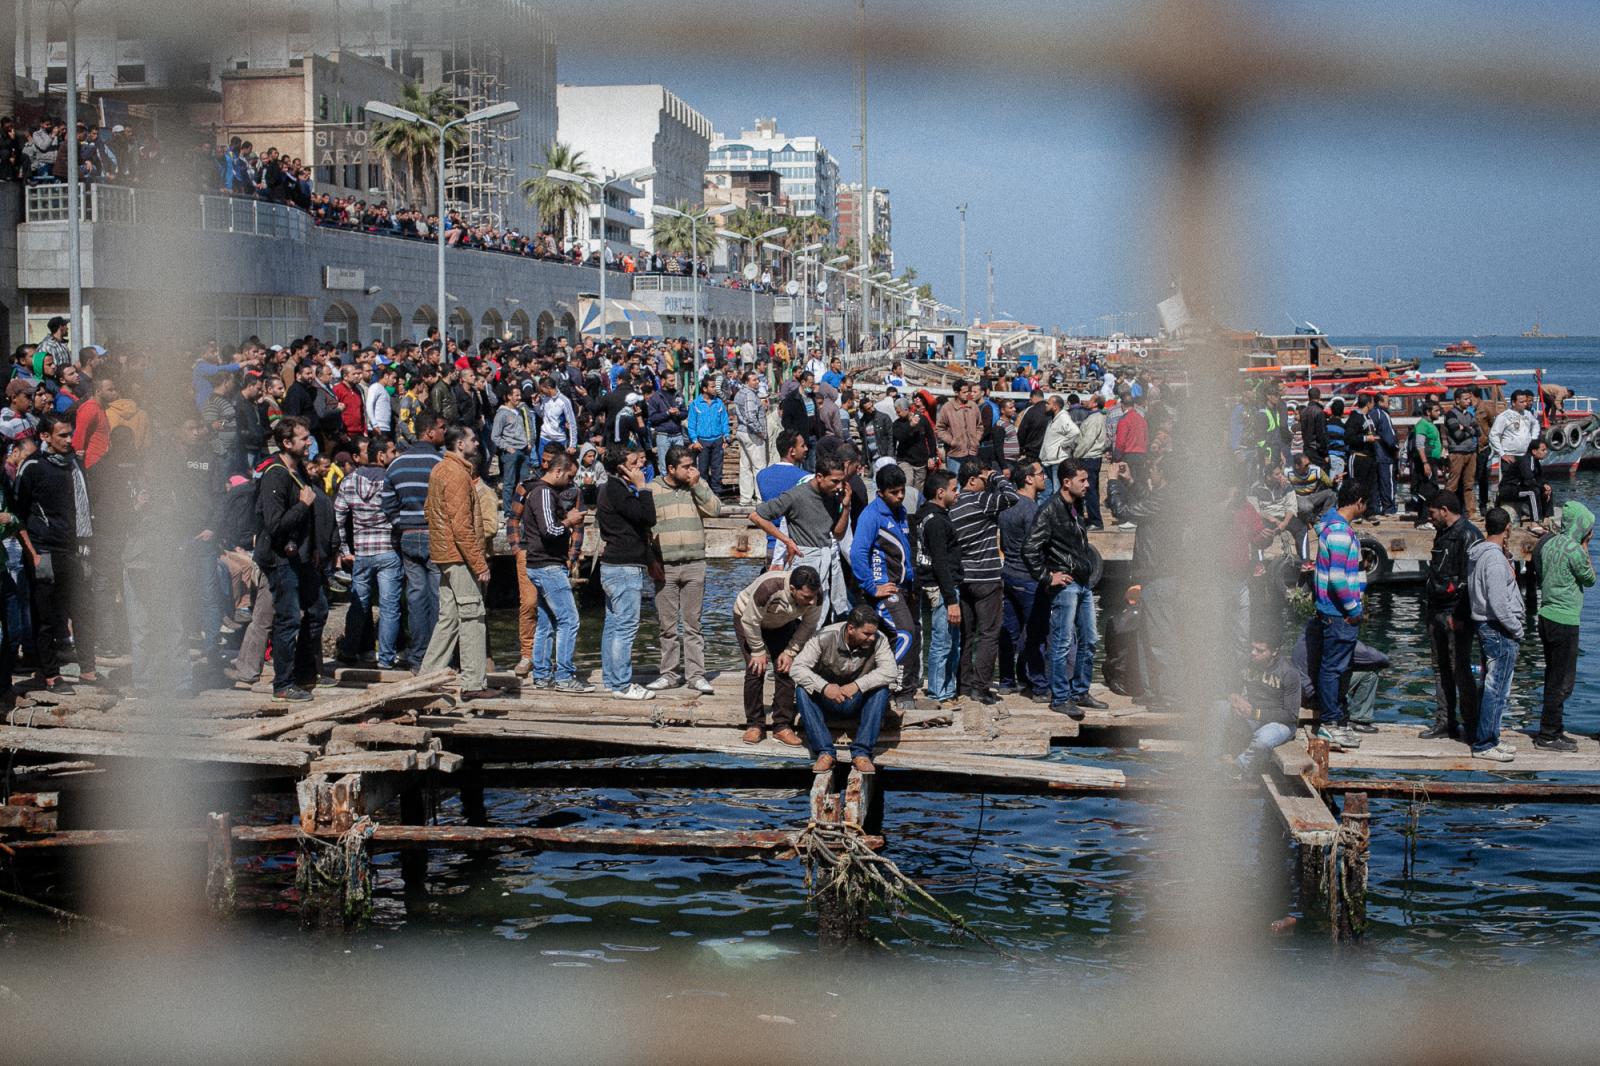 Protesters headed to Suez Canal Port on March 9, 2013 after hearing the verdict of the Port Said massacre that killed 72 people after an Ultras football match in early 2012 that turned violent.